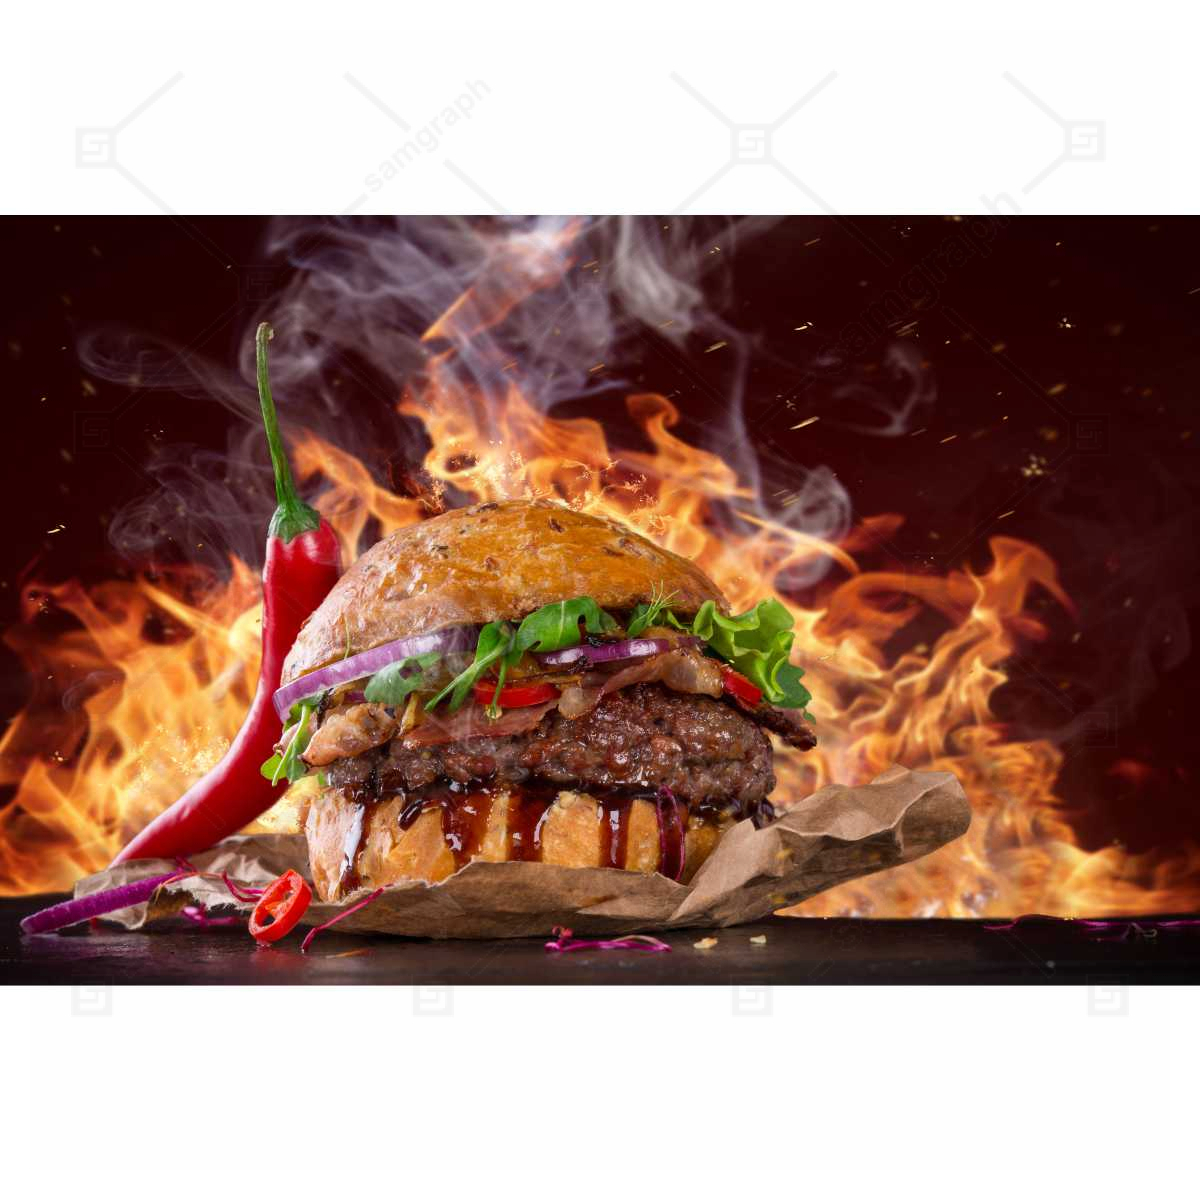 High quality photo of juicy hamburger with fire and pepper lettuce onion parsley 2 1 آیکون دفتر یاداشت سیمی